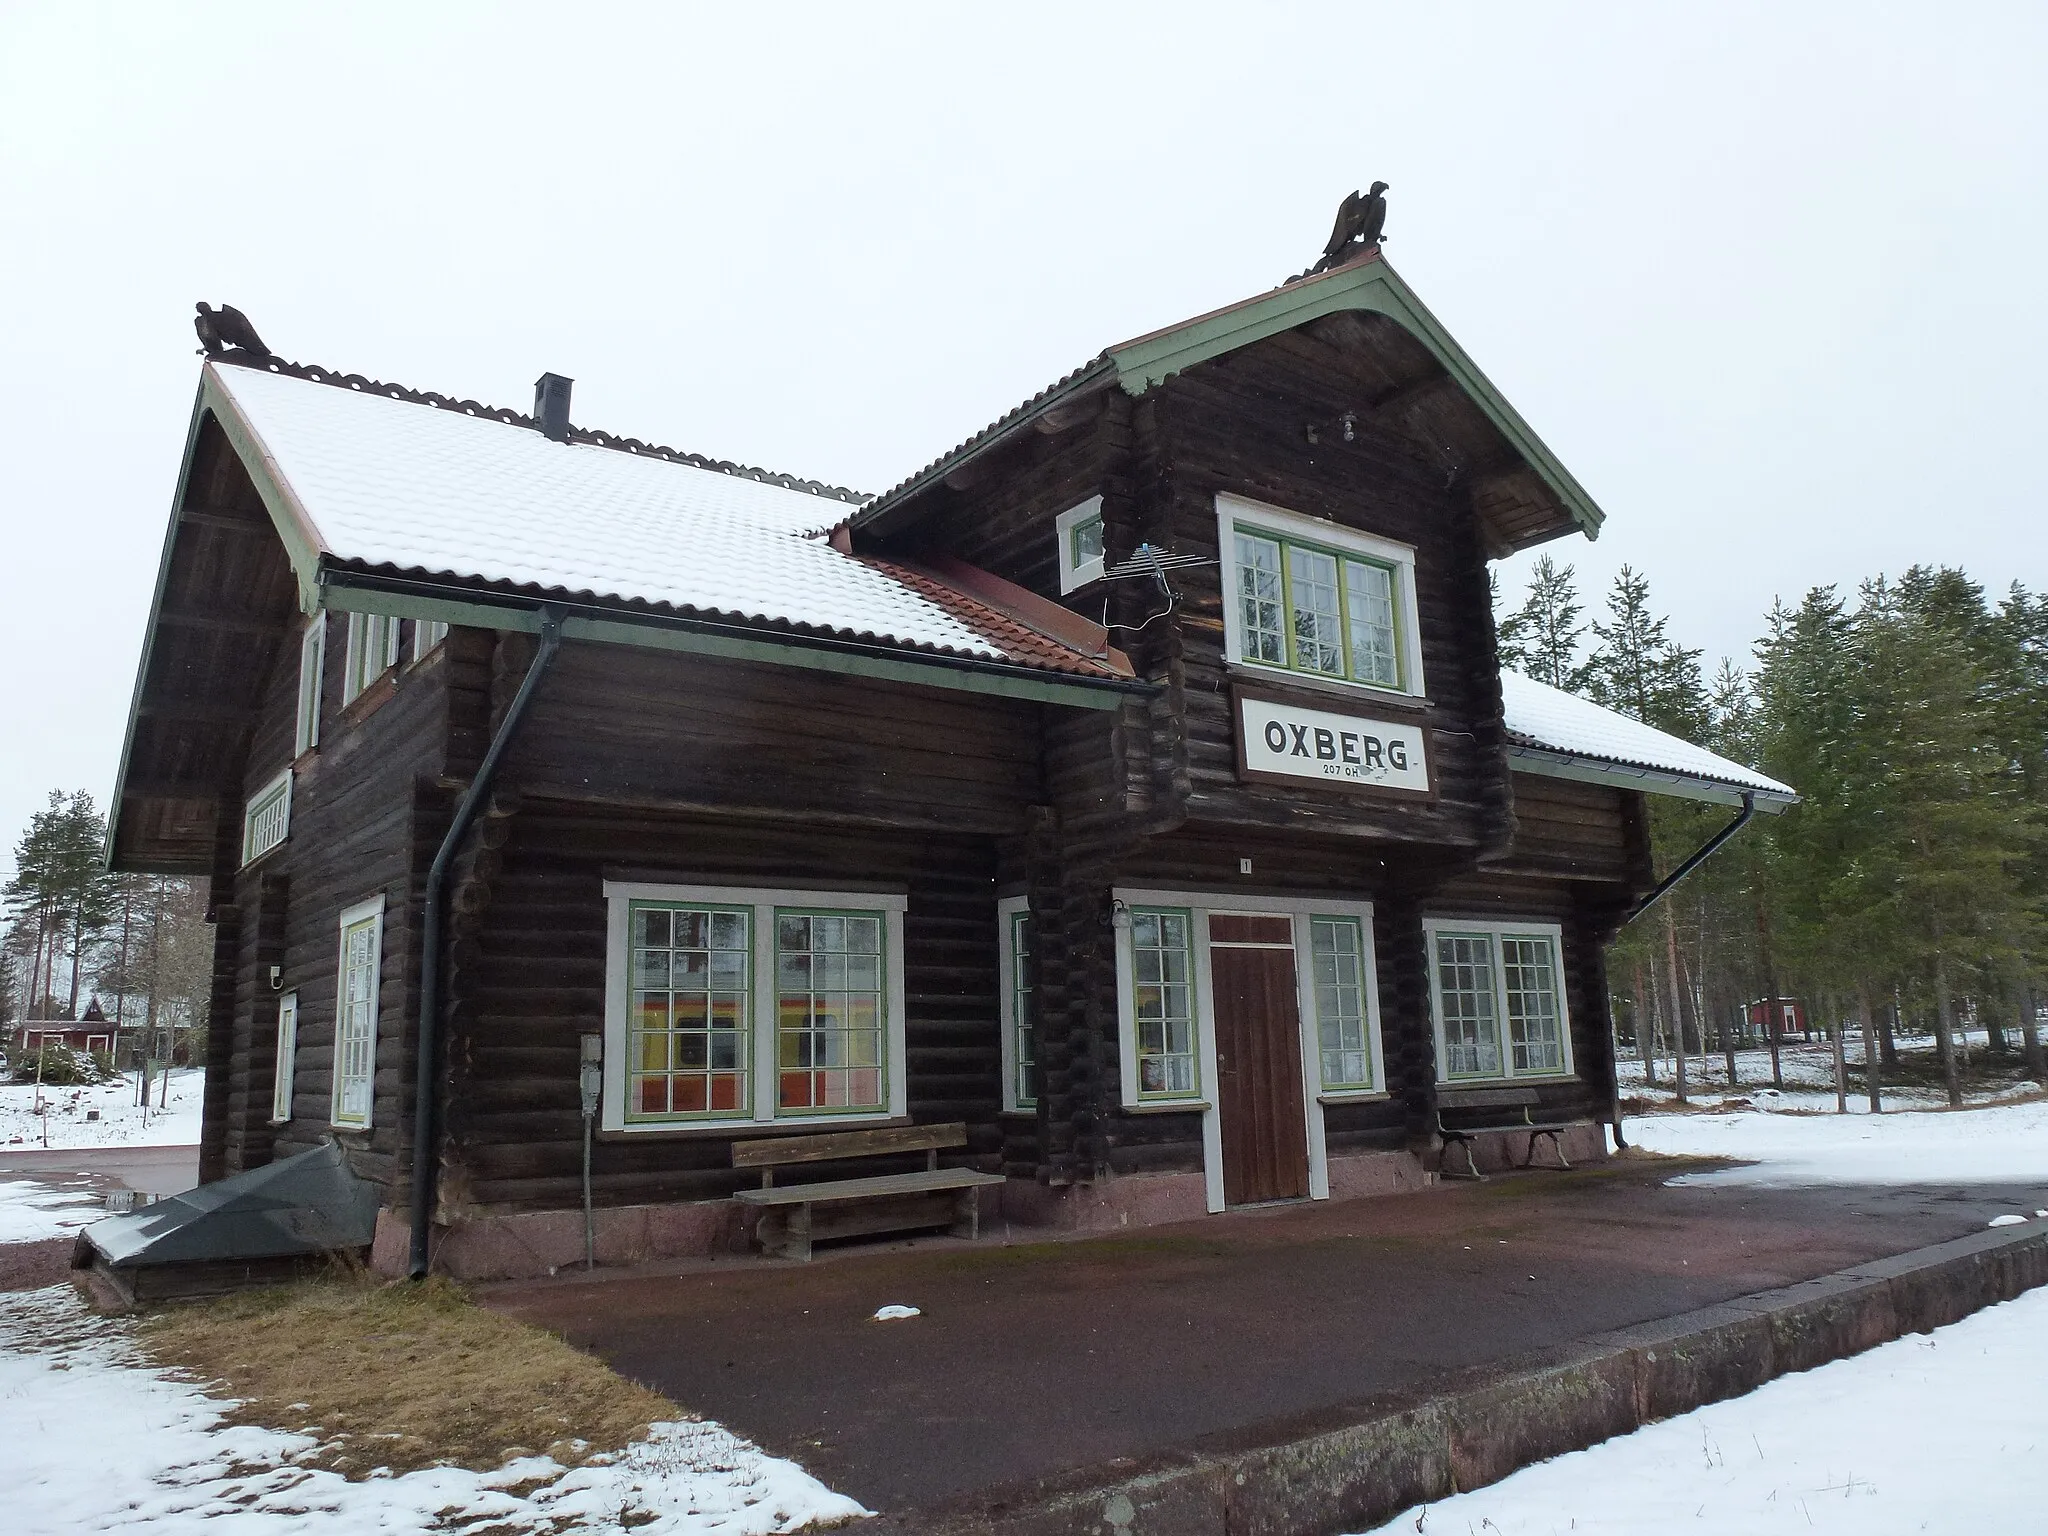 Photo showing: Railway station Oxberg in Dalarna County, Sweden